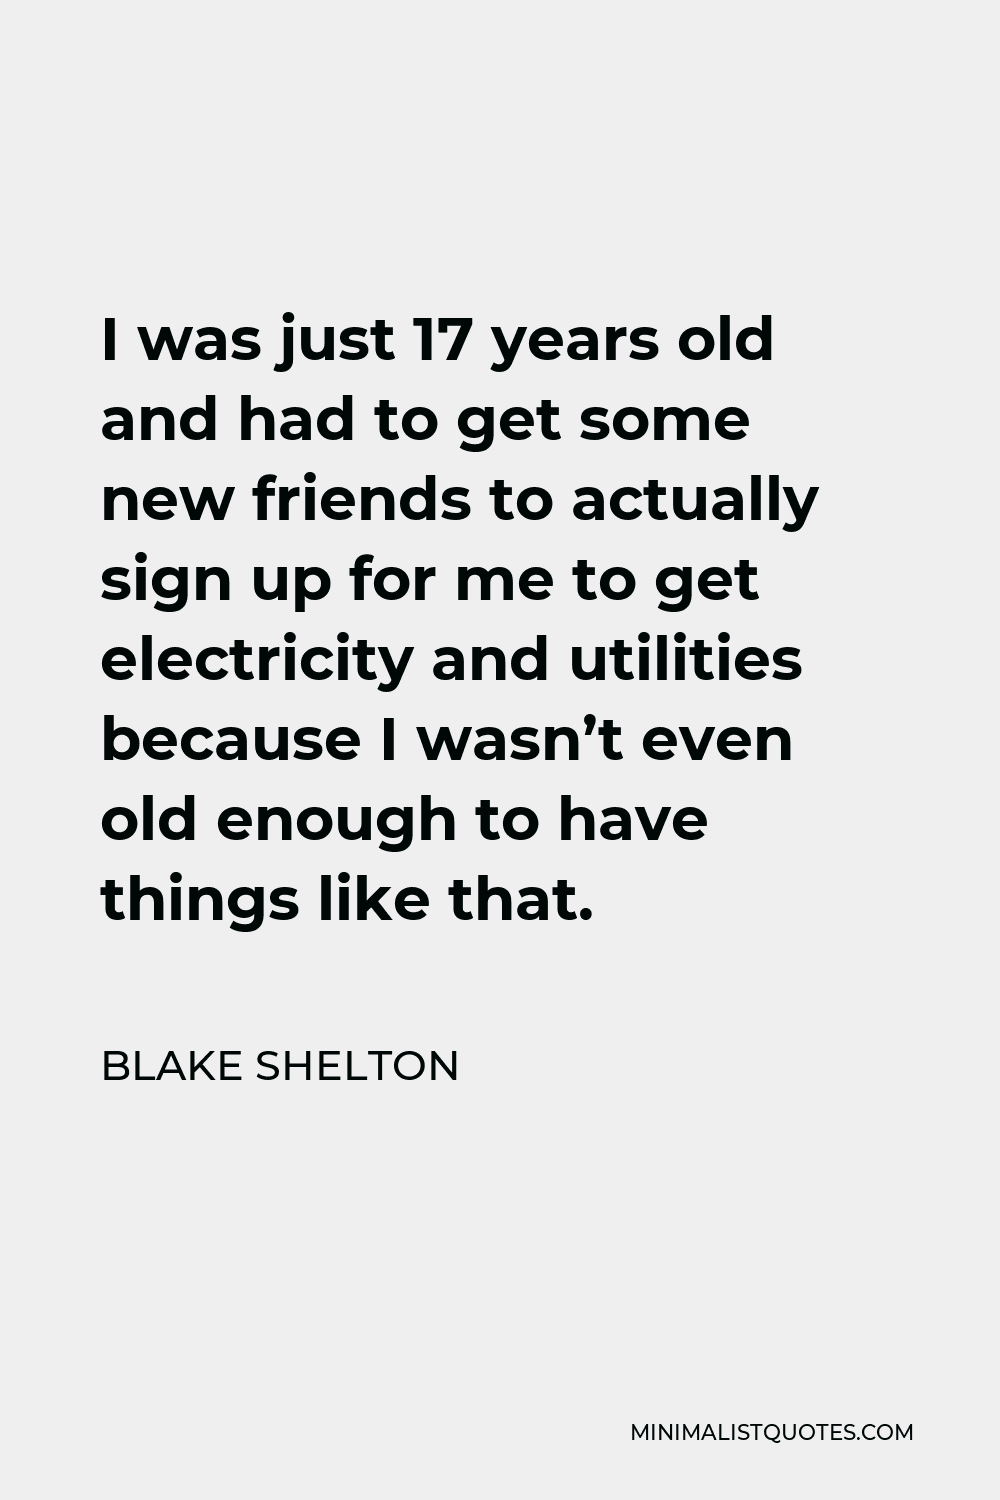 Blake Shelton Quote - I was just 17 years old and had to get some new friends to actually sign up for me to get electricity and utilities because I wasn’t even old enough to have things like that.